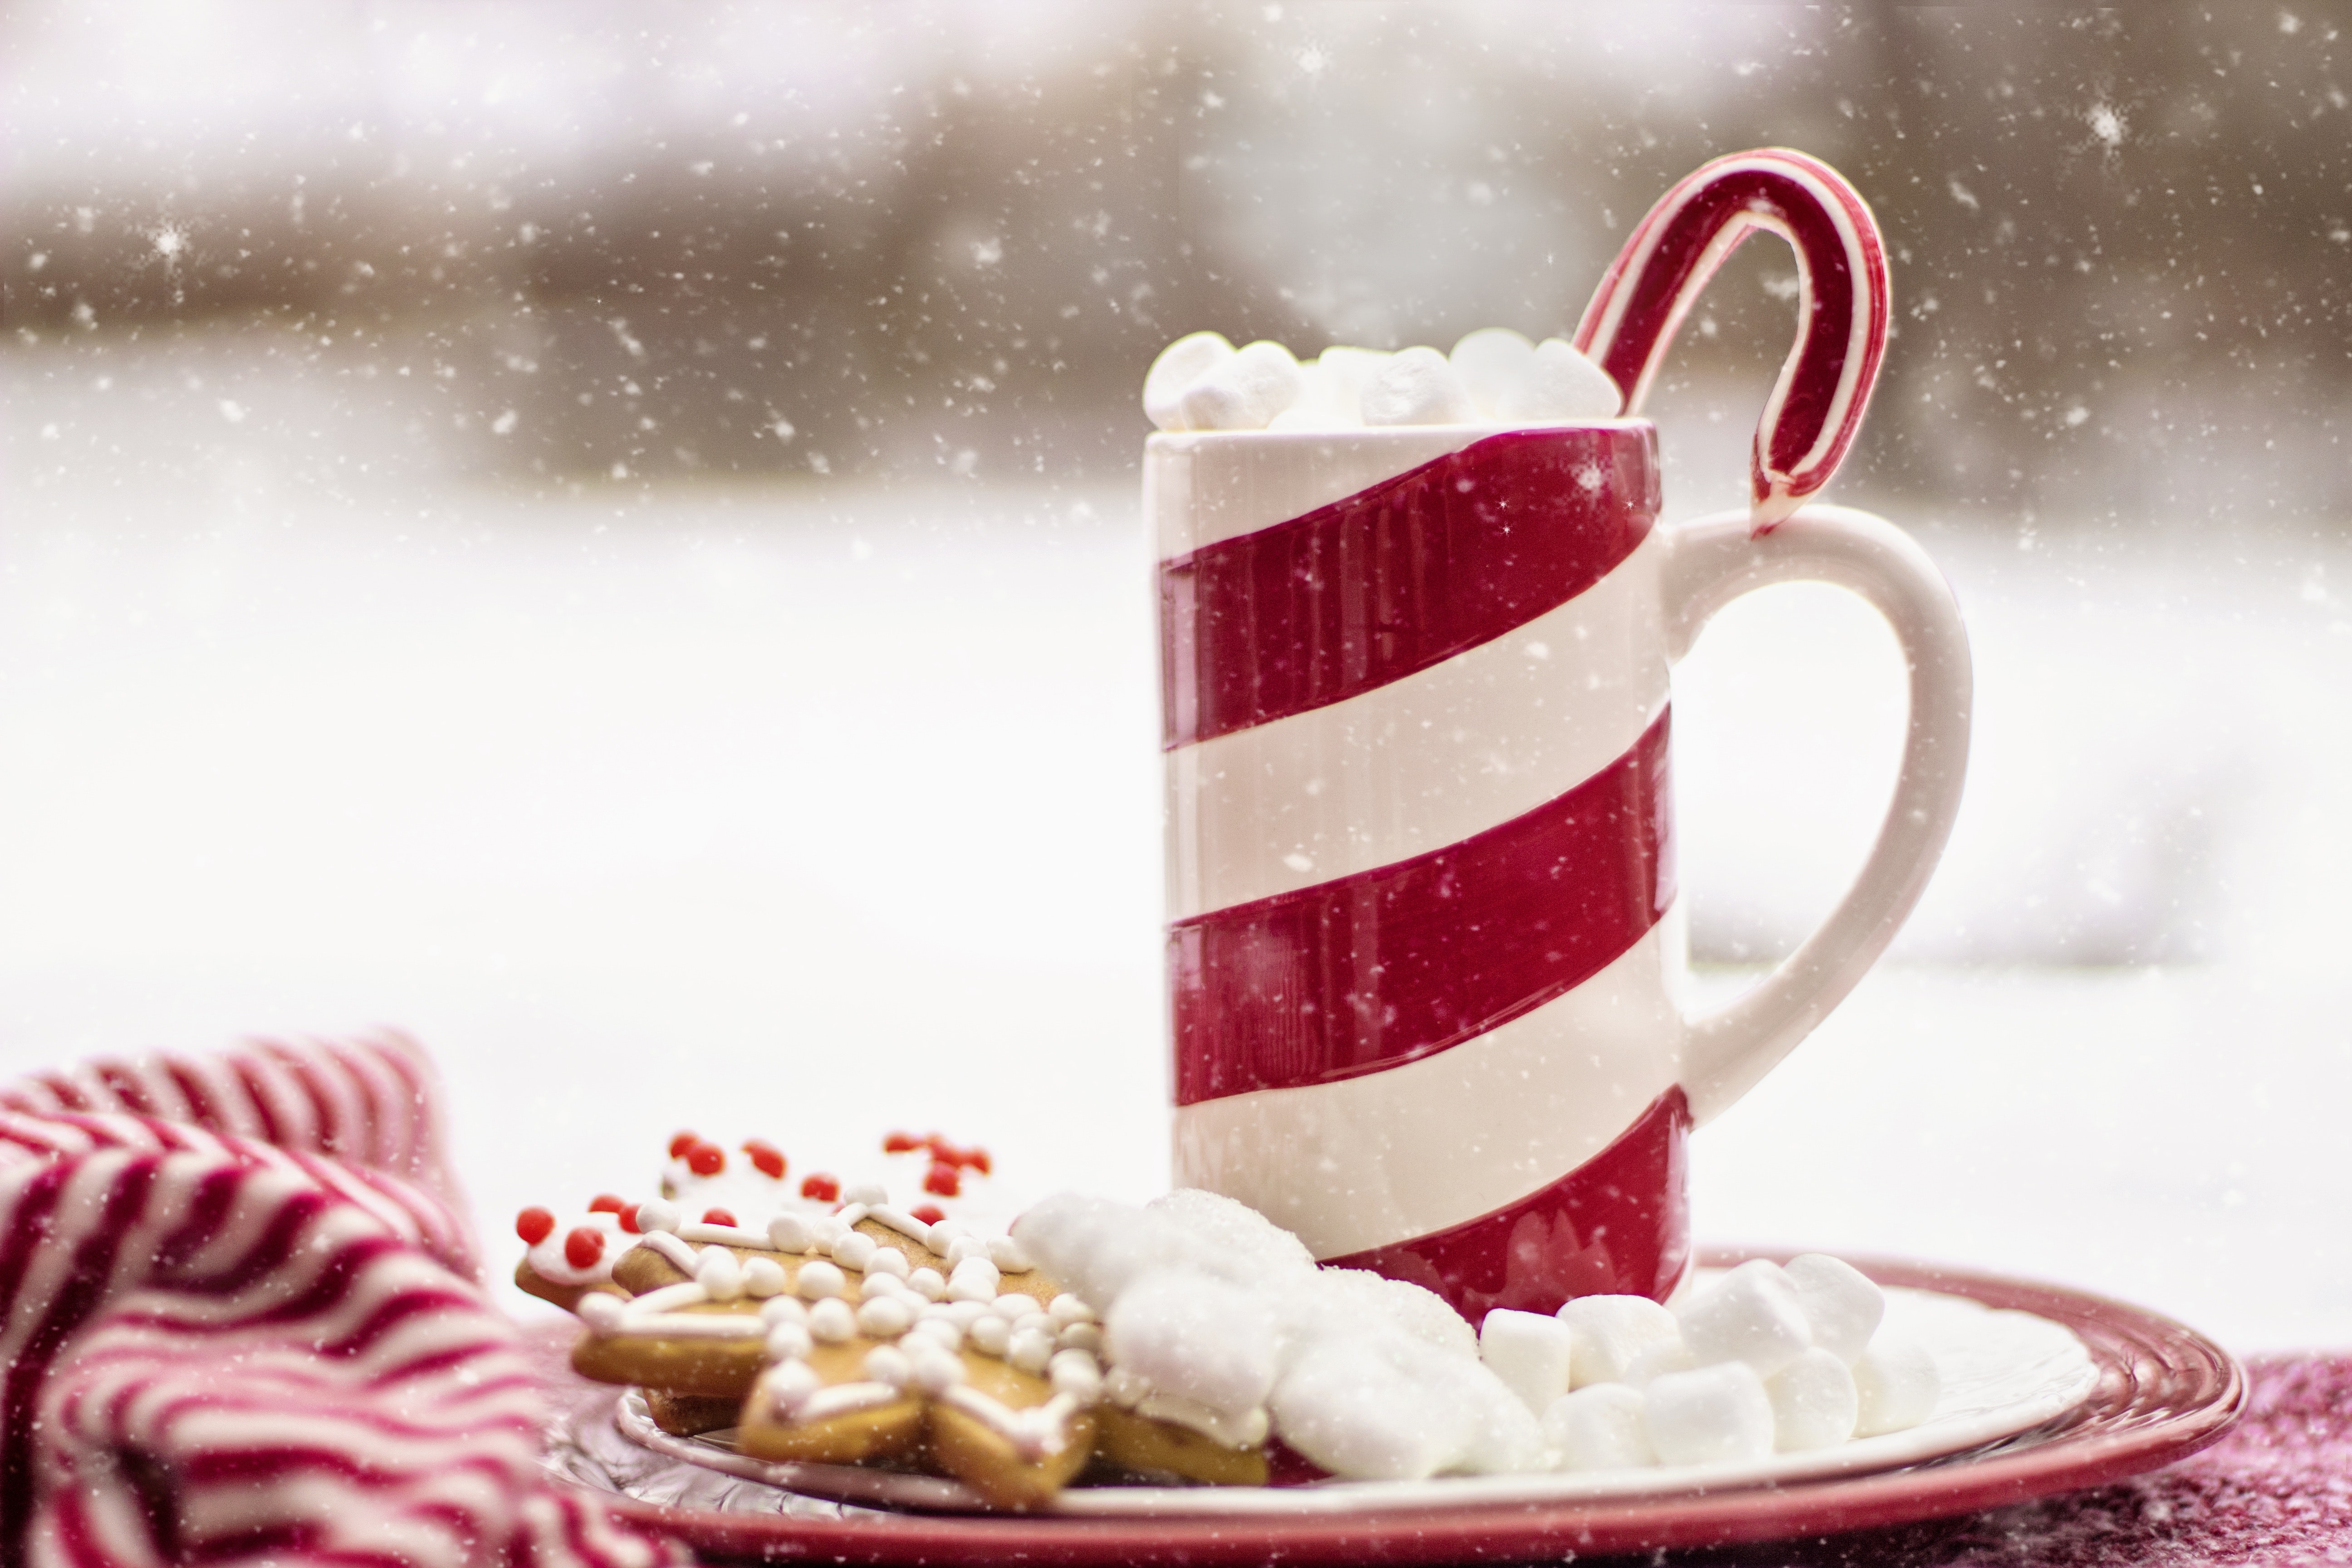 Snow falling on a mug with marshmallows and Christmas cookies on a plate